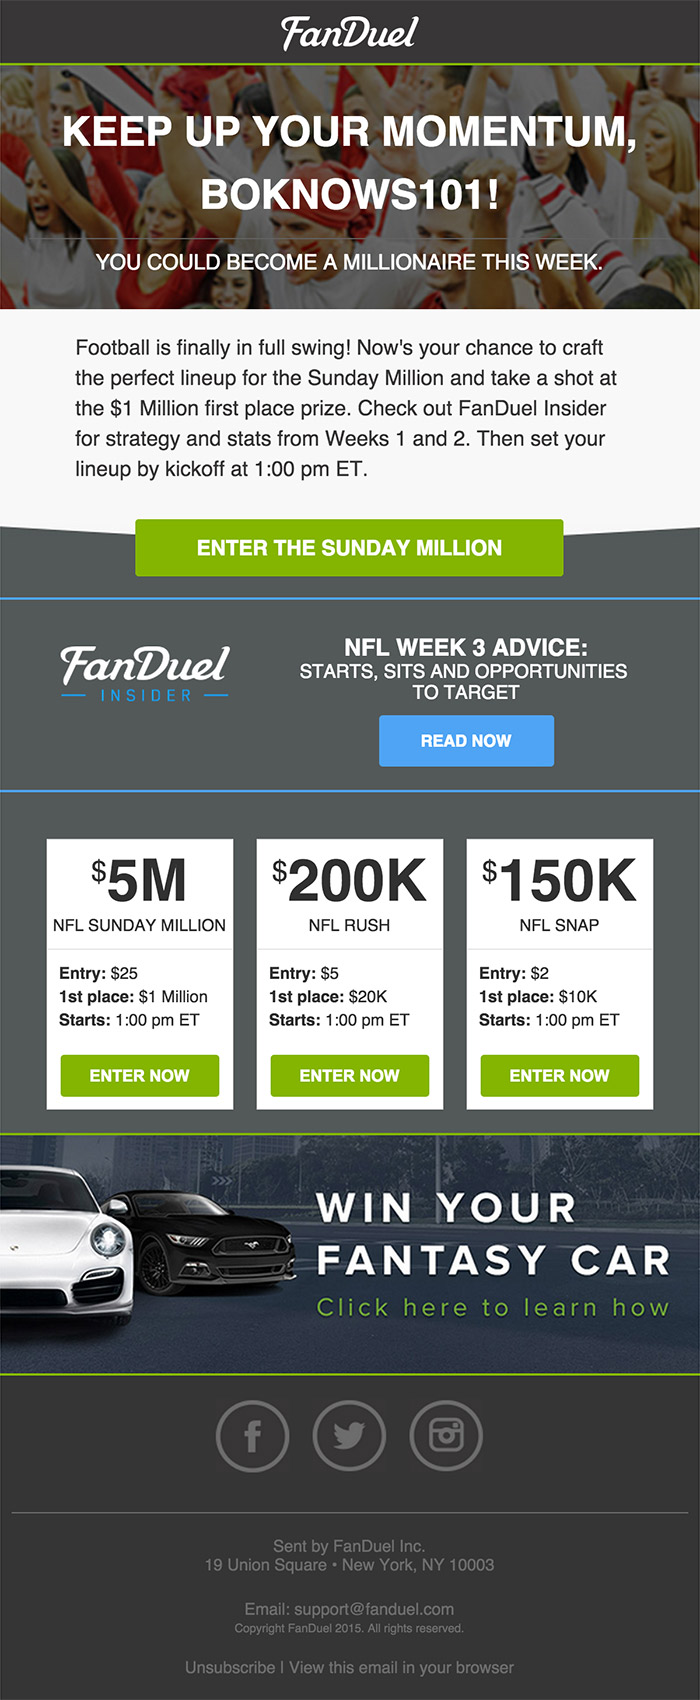 Fanduel Contests Email nice design